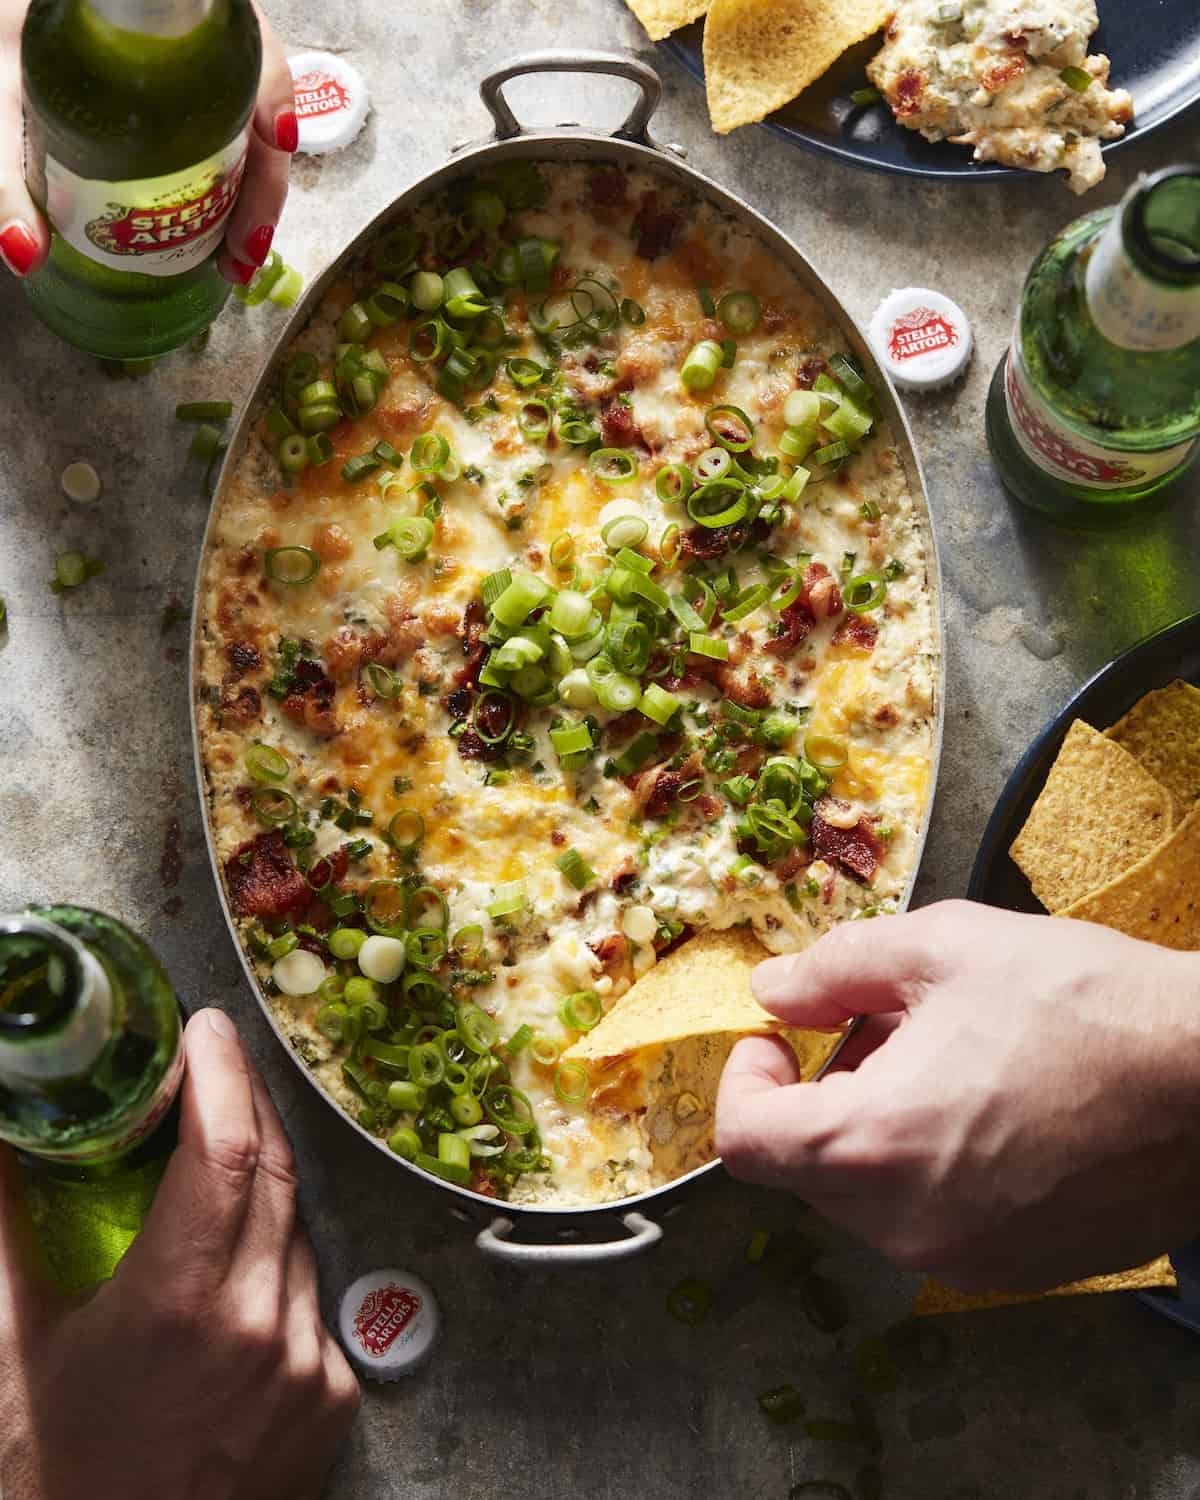 An overheat shot of jalapeño popper dip in a rectangular dish, with someone's hand dipping a tortilla chip into it, and a couple other people's hands holding Stella Artois beer bottles placed on the side.